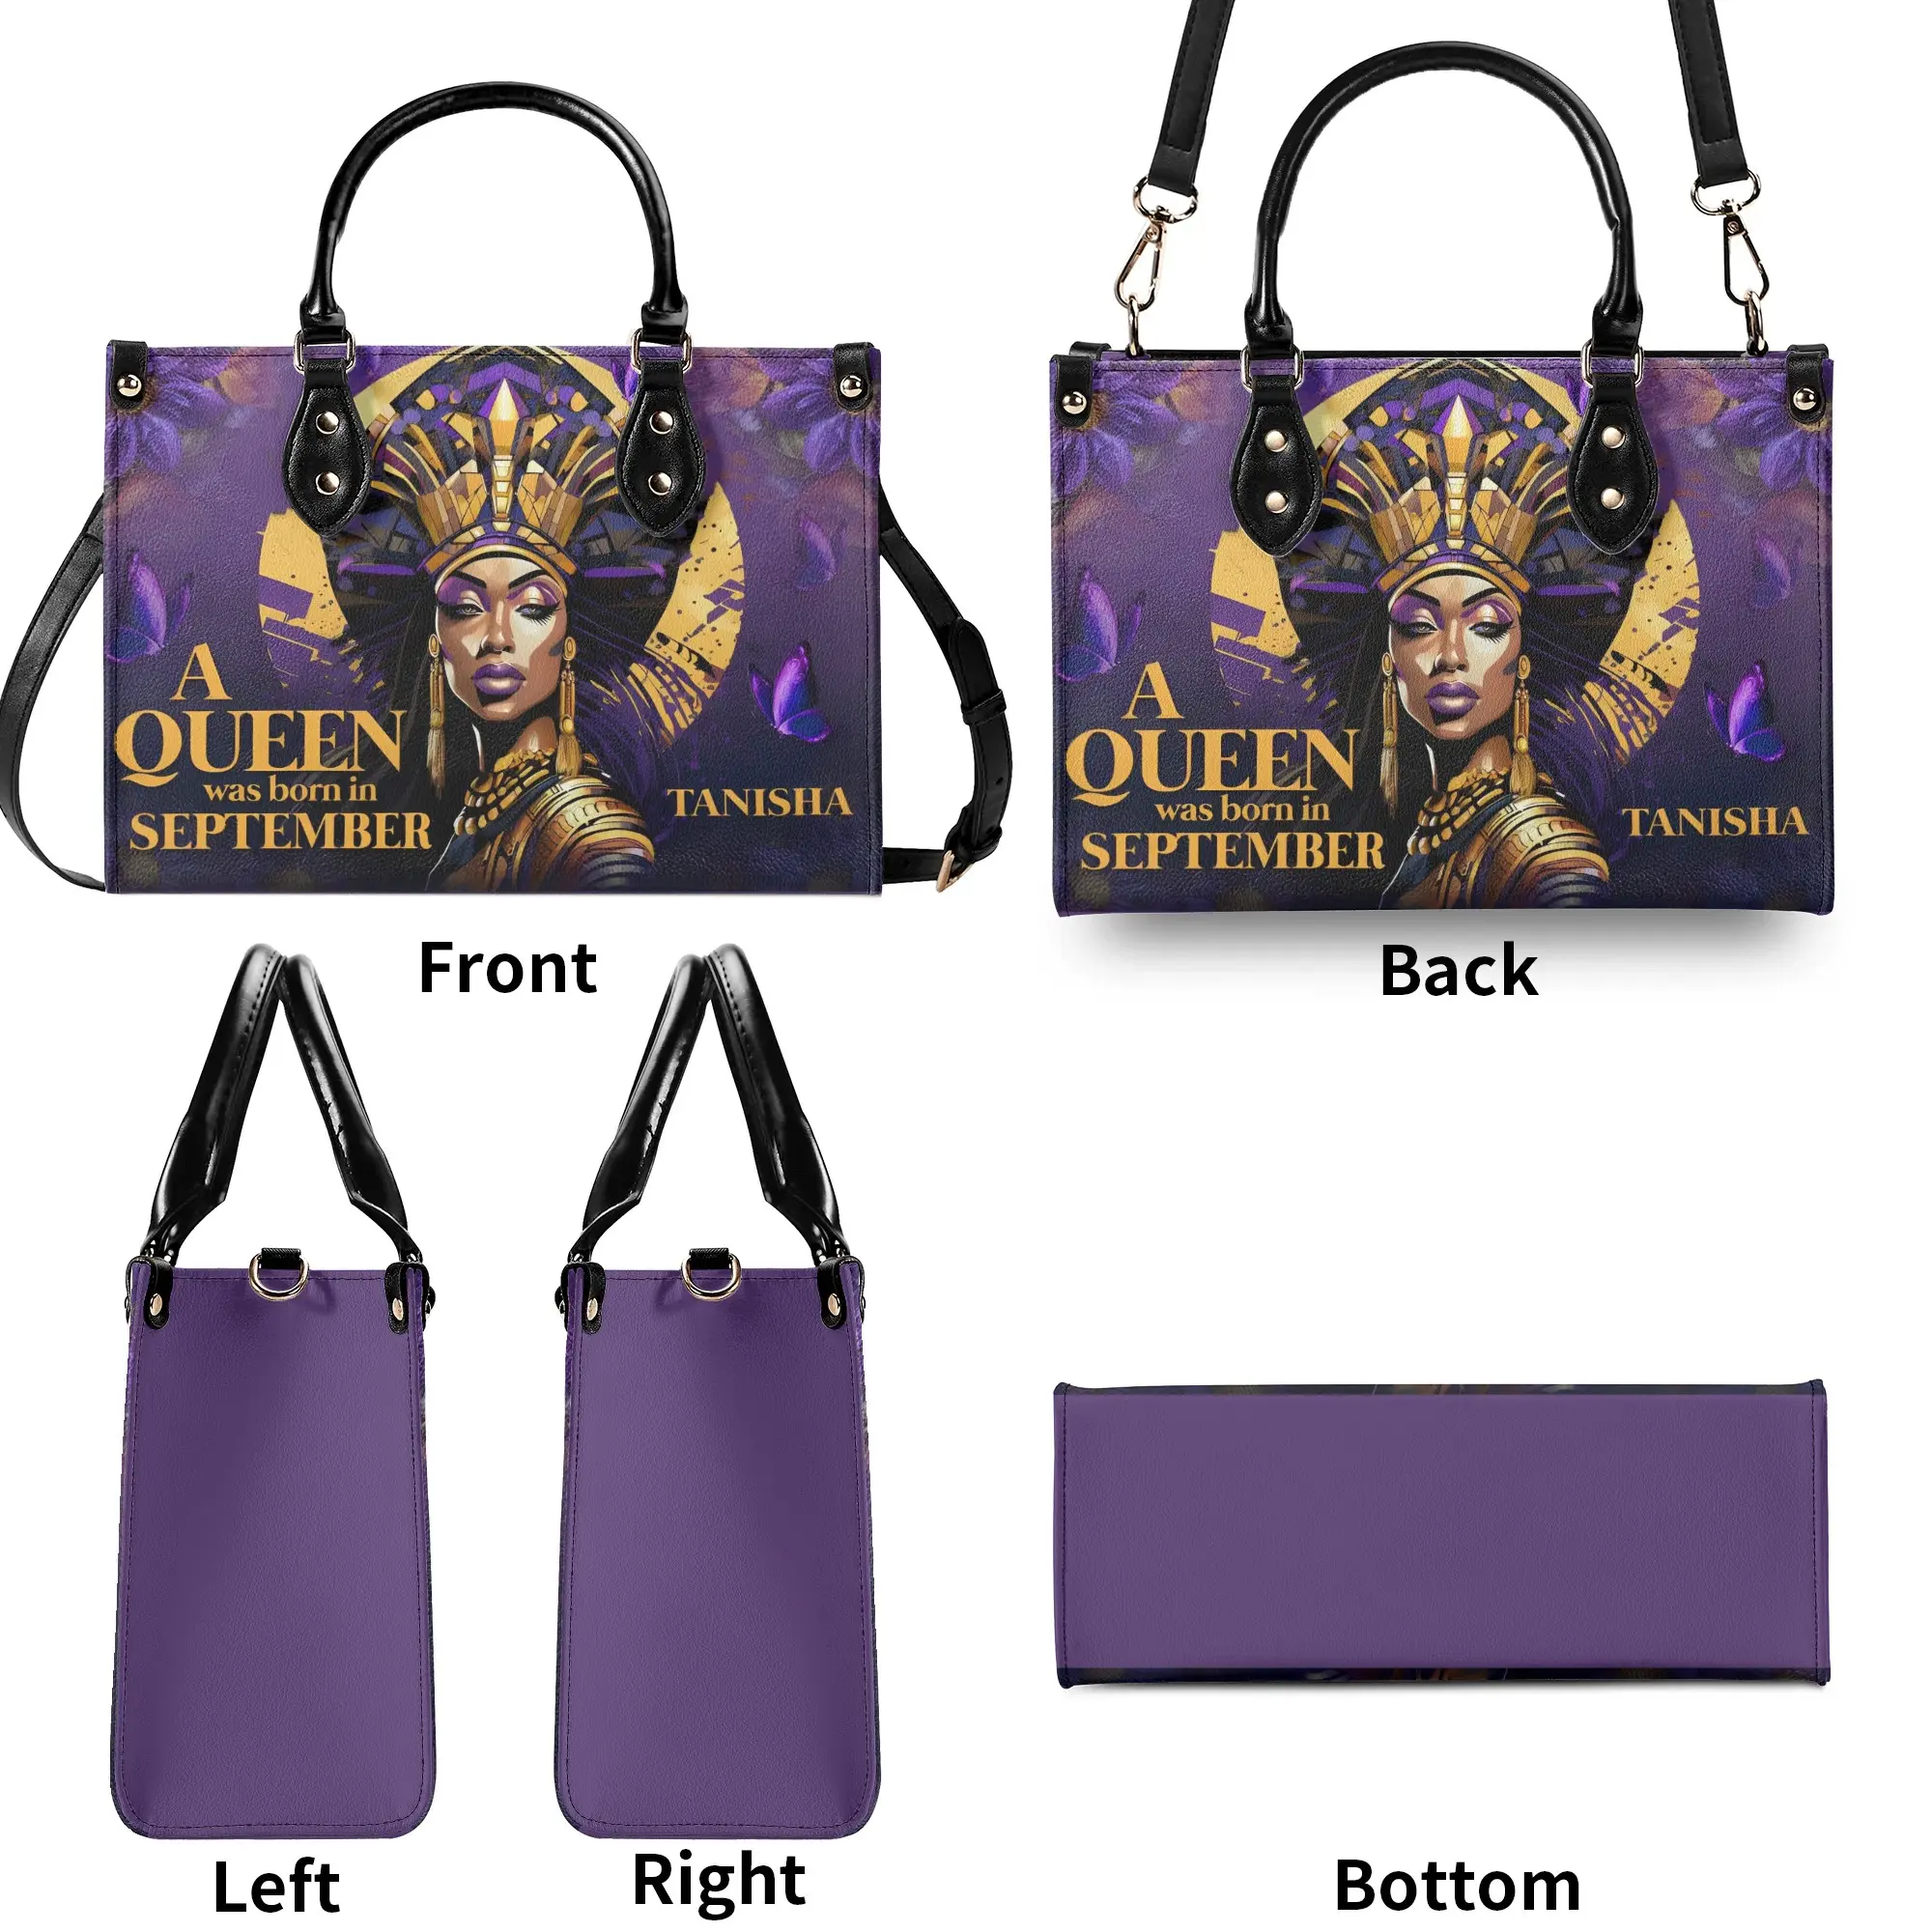 Personalized Leather Handbag A Beautiful Queen